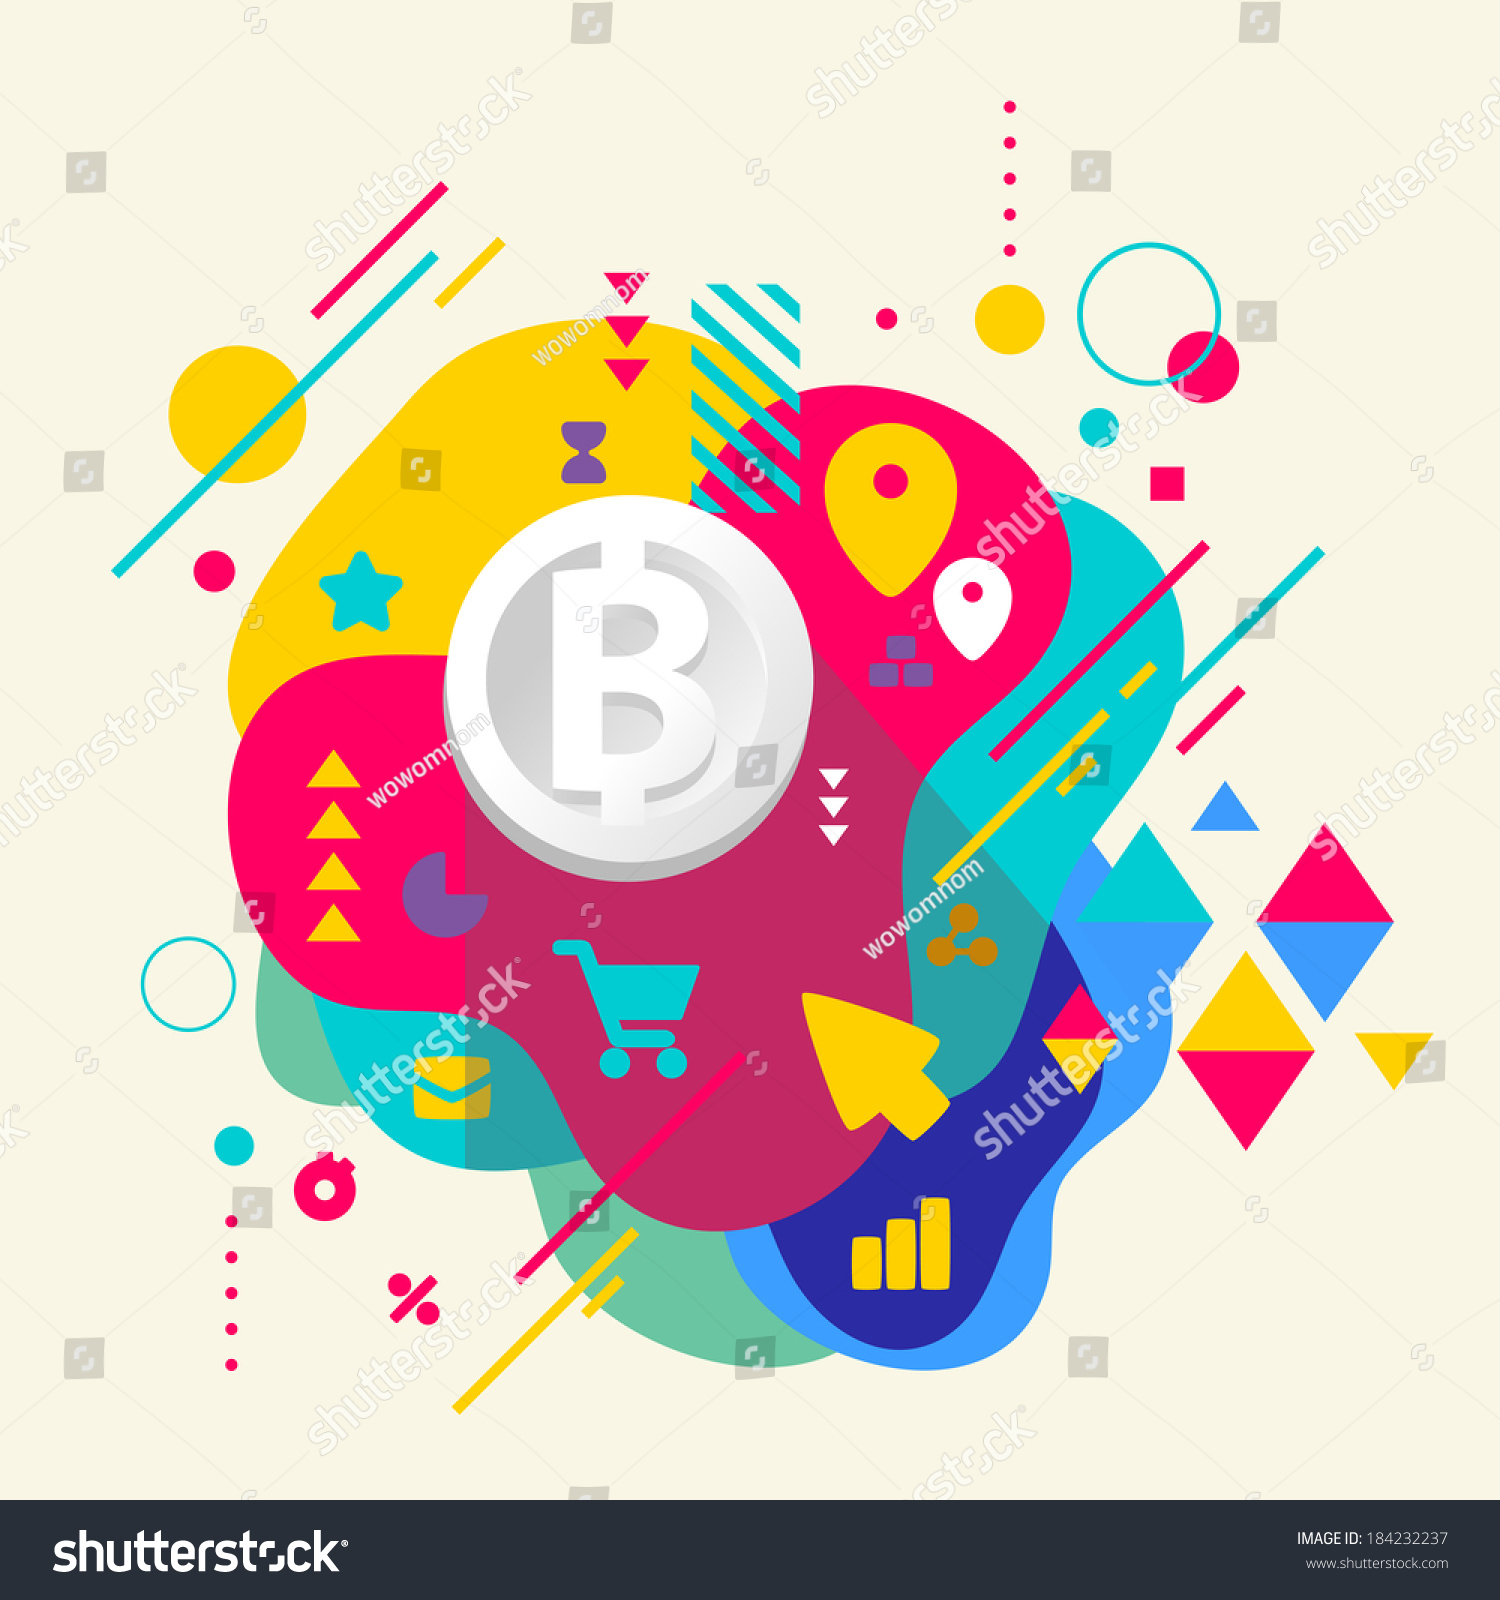 SVG of Bitcoin on abstract colorful spotted background with different elements. Flat design. svg